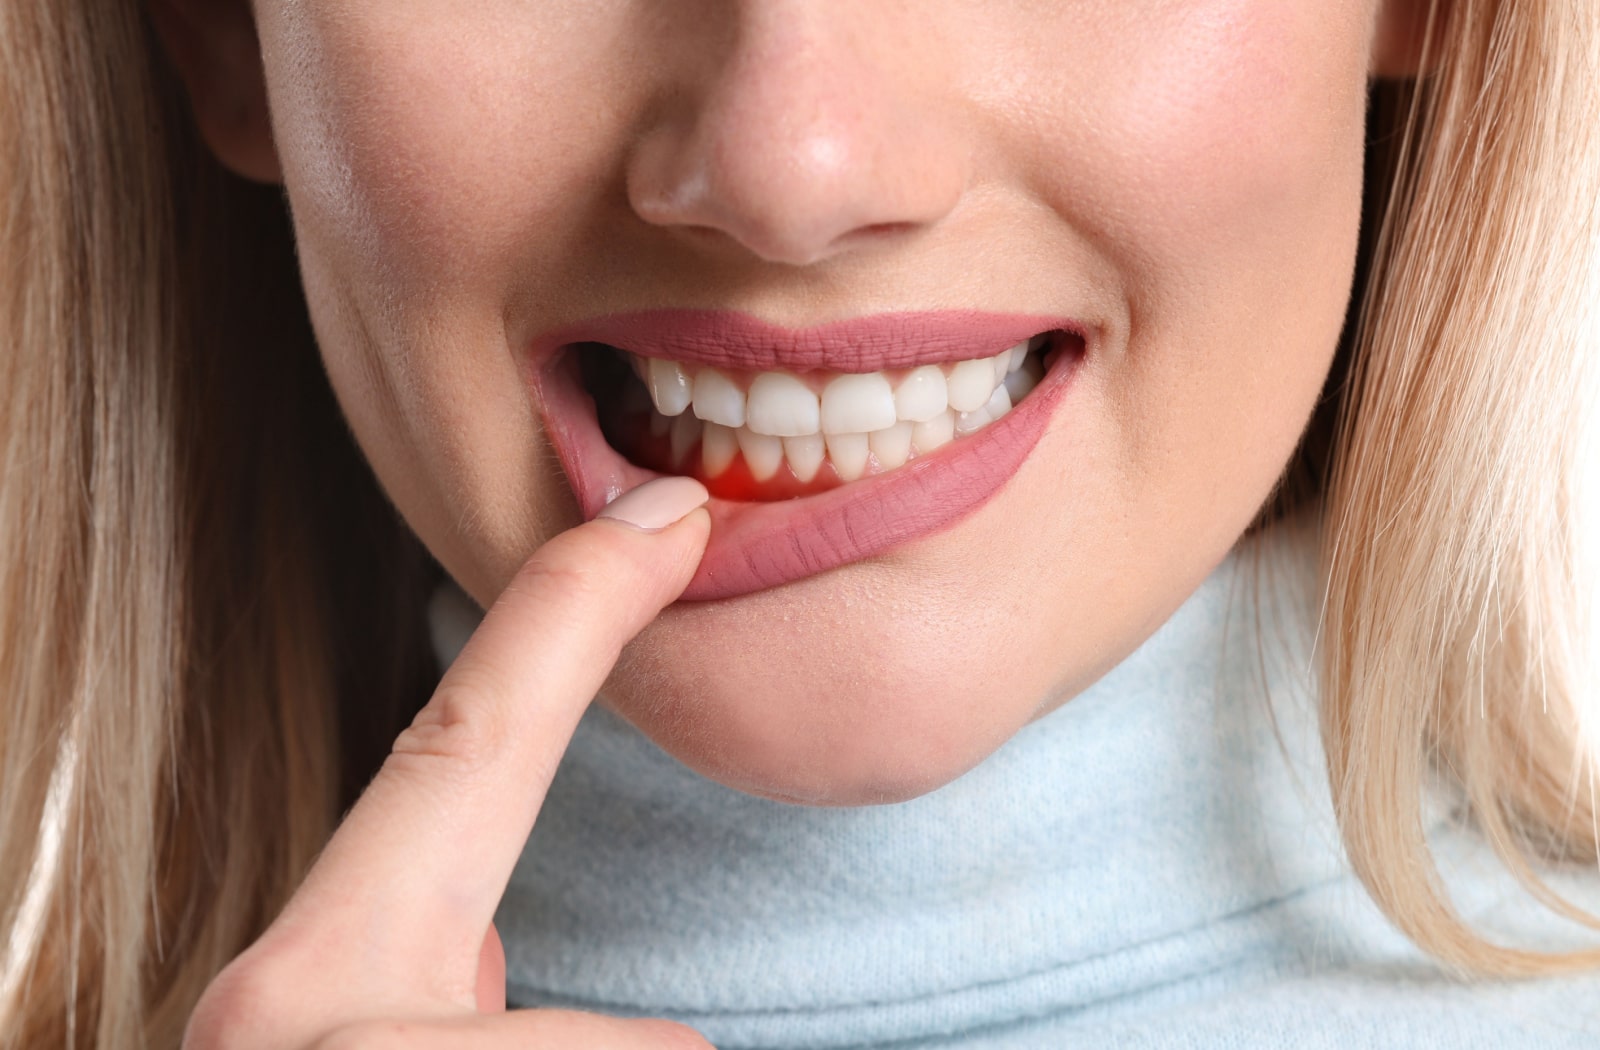 A woman pulls down the side of her lip with her index finger, showing inflammation to her gums